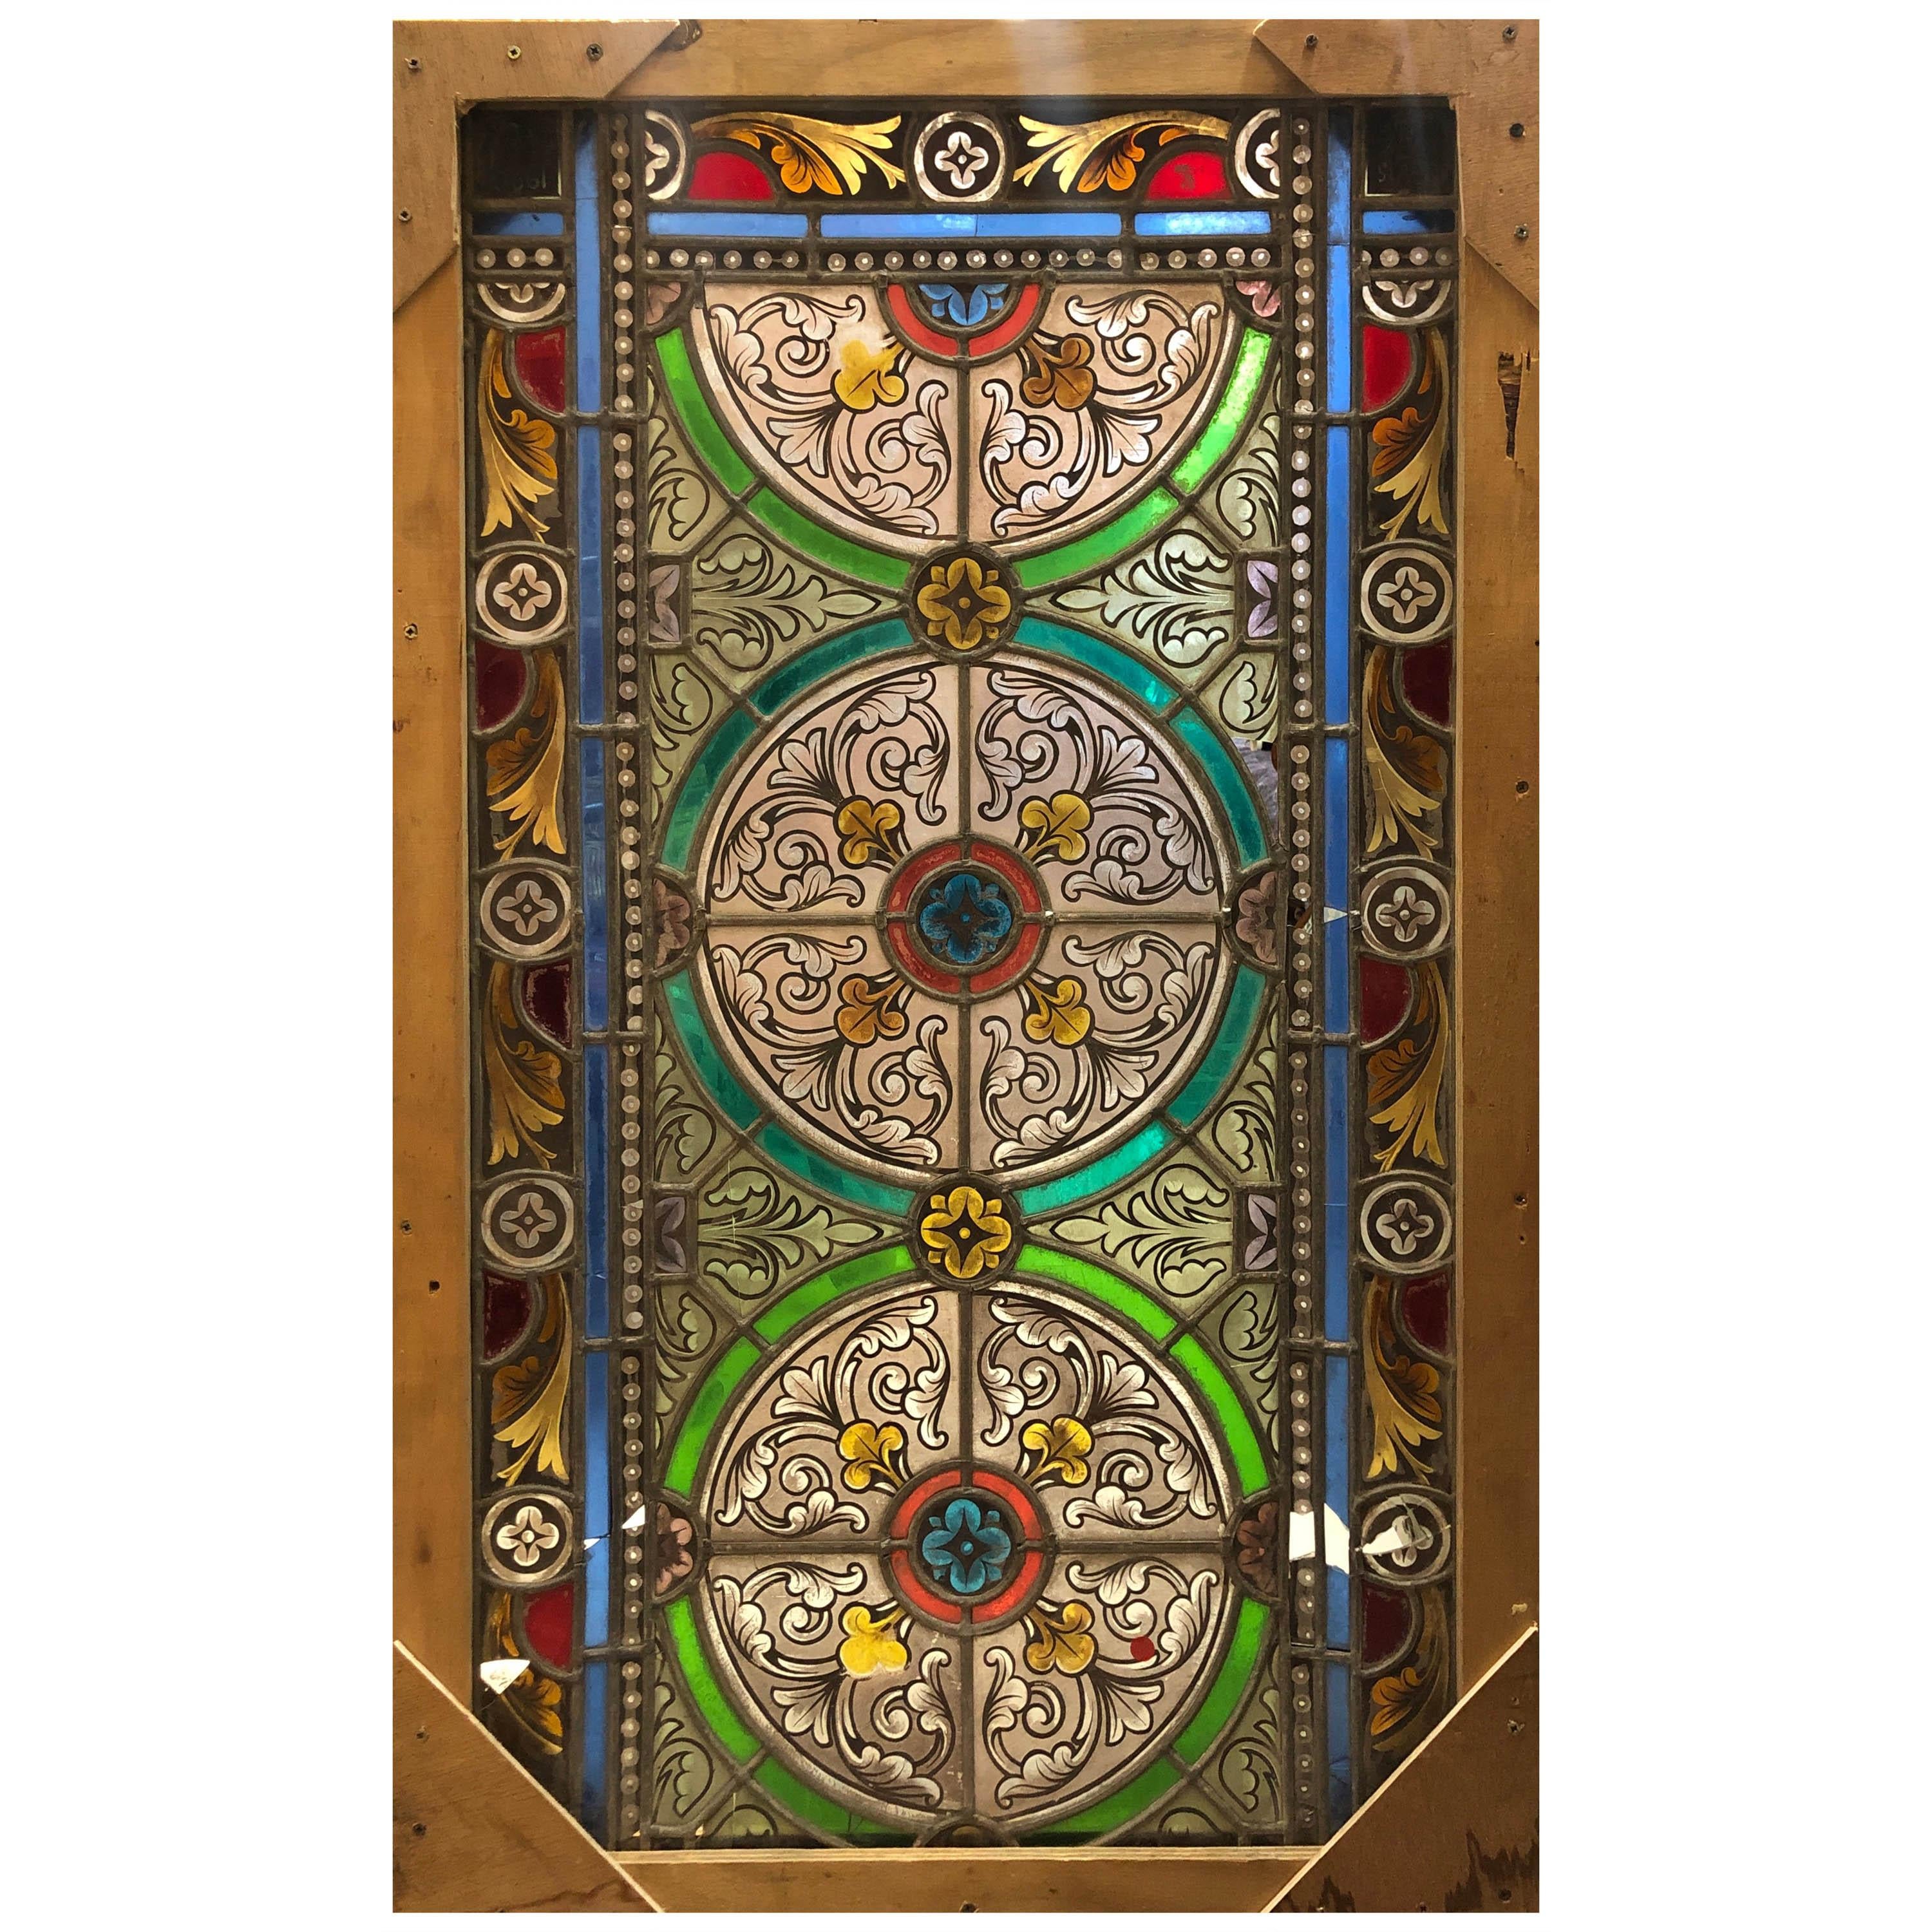 20th Century French Stained Glass Window with Floral Decoration Signed and Dated